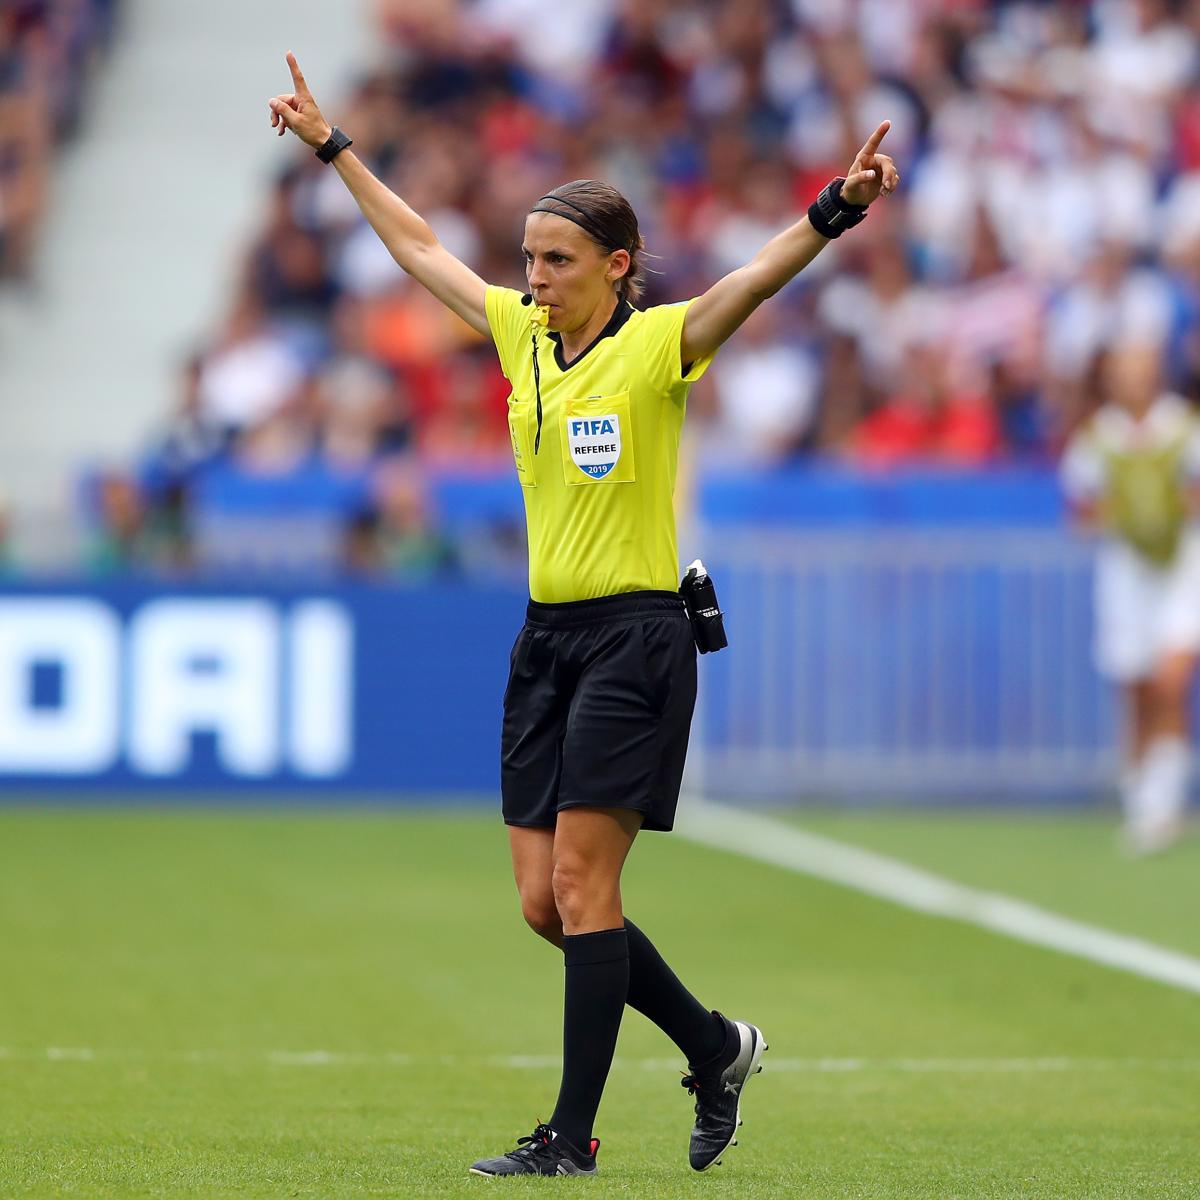 Stéphanie Frappart leads the first all-female officiating crew in men's World Cup history